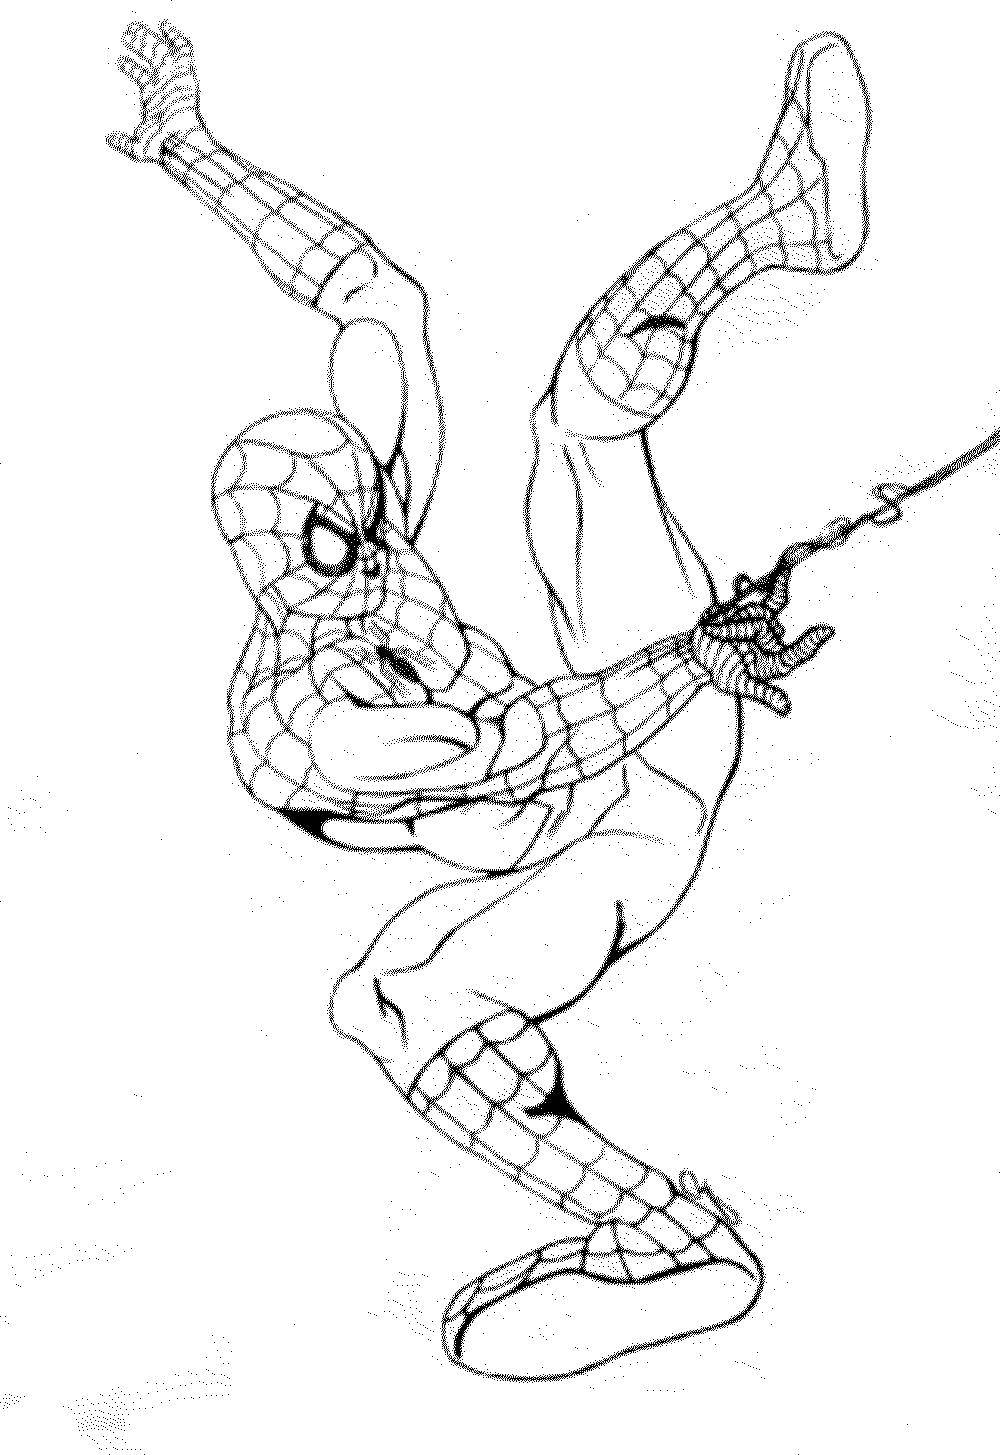 Coloring Spider-man. Category superheroes. Tags:  spider man, superheroes.